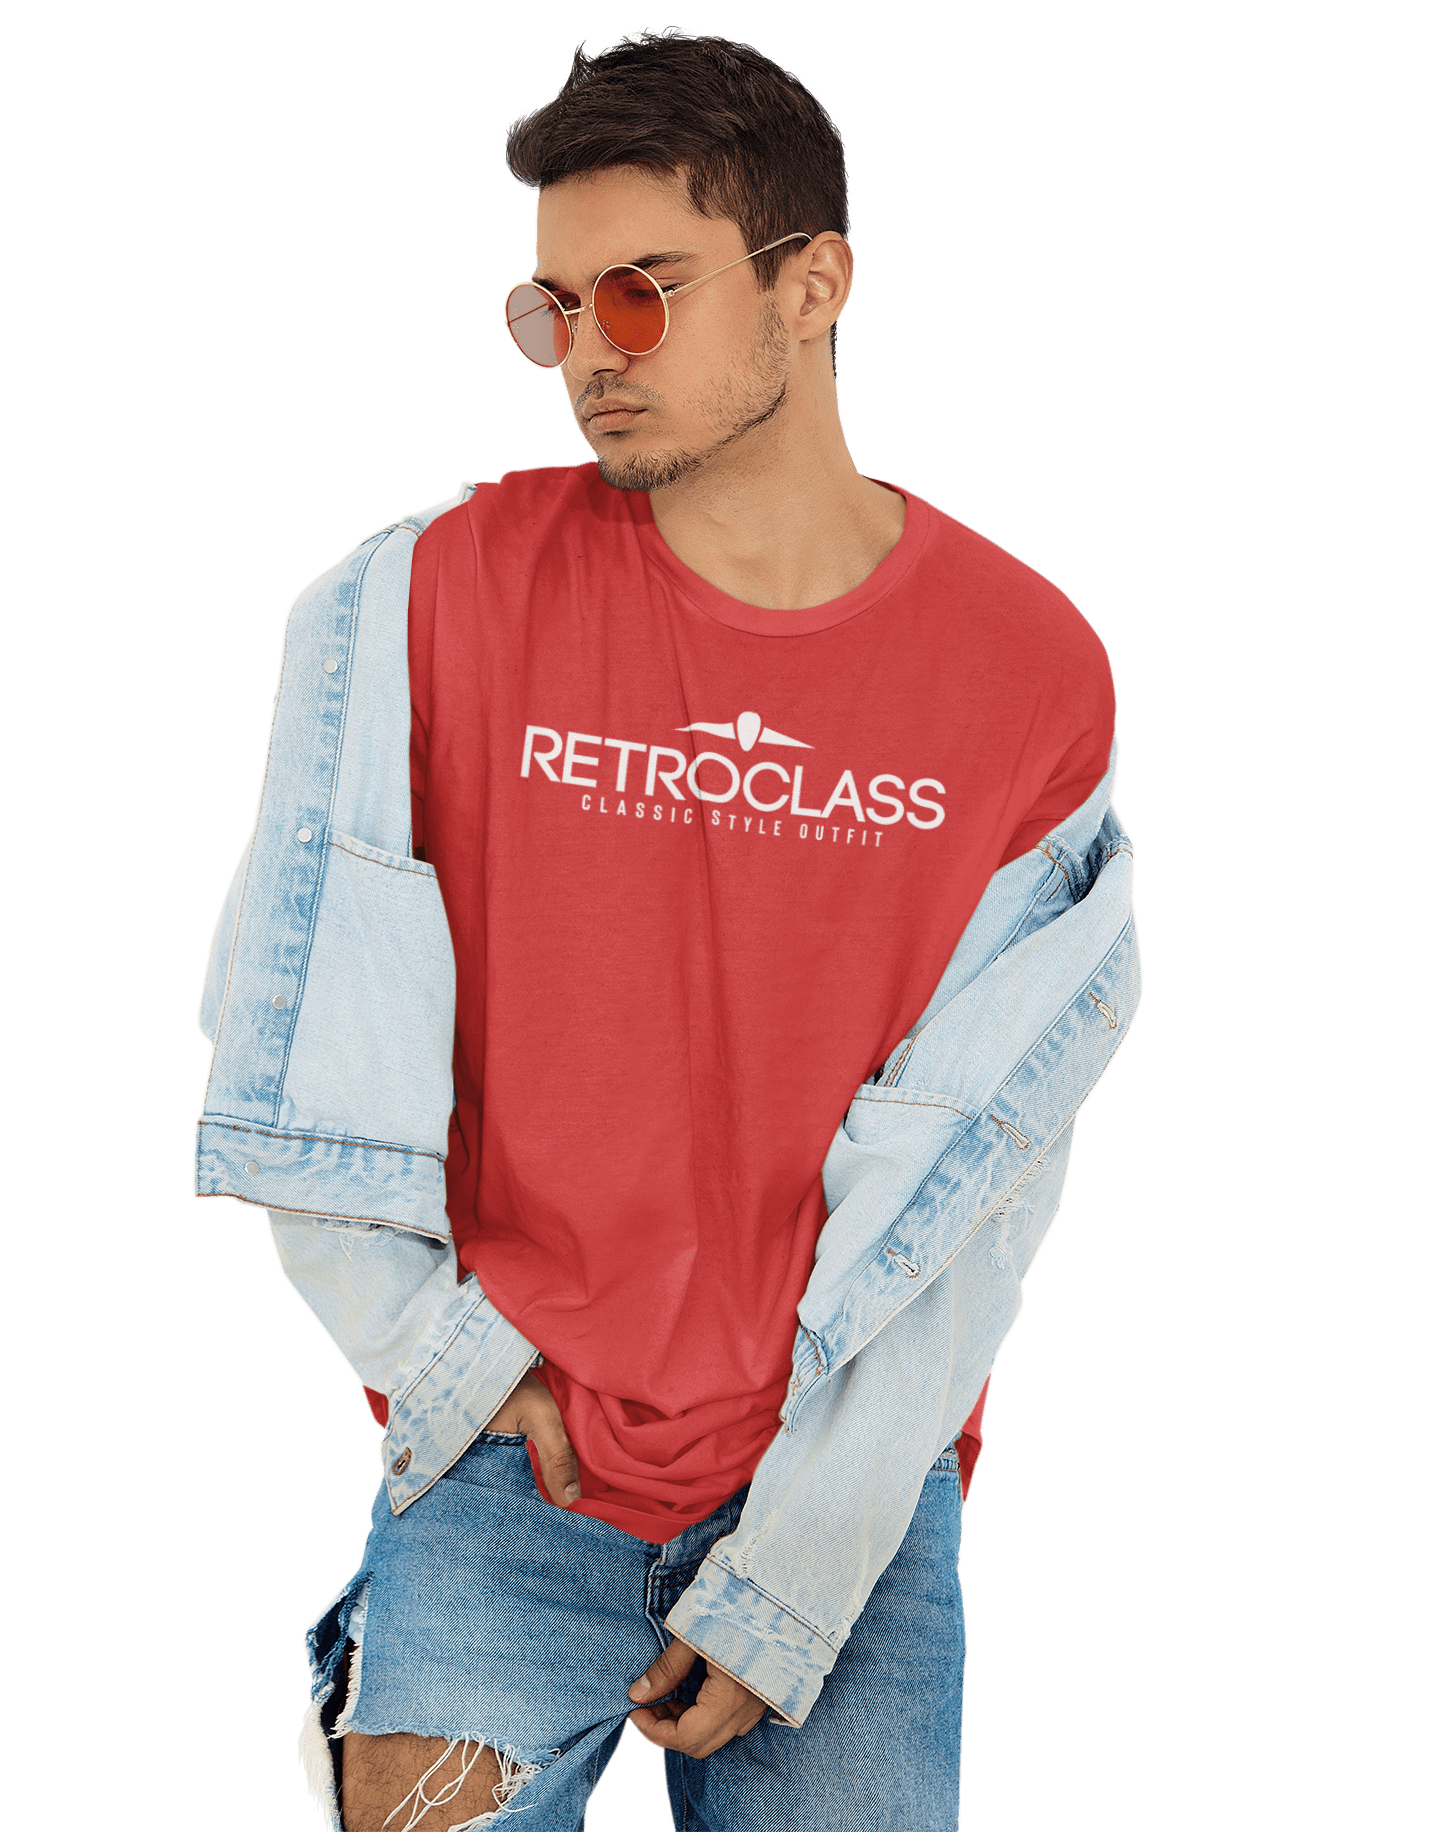 kaos retroclass classic style outfit